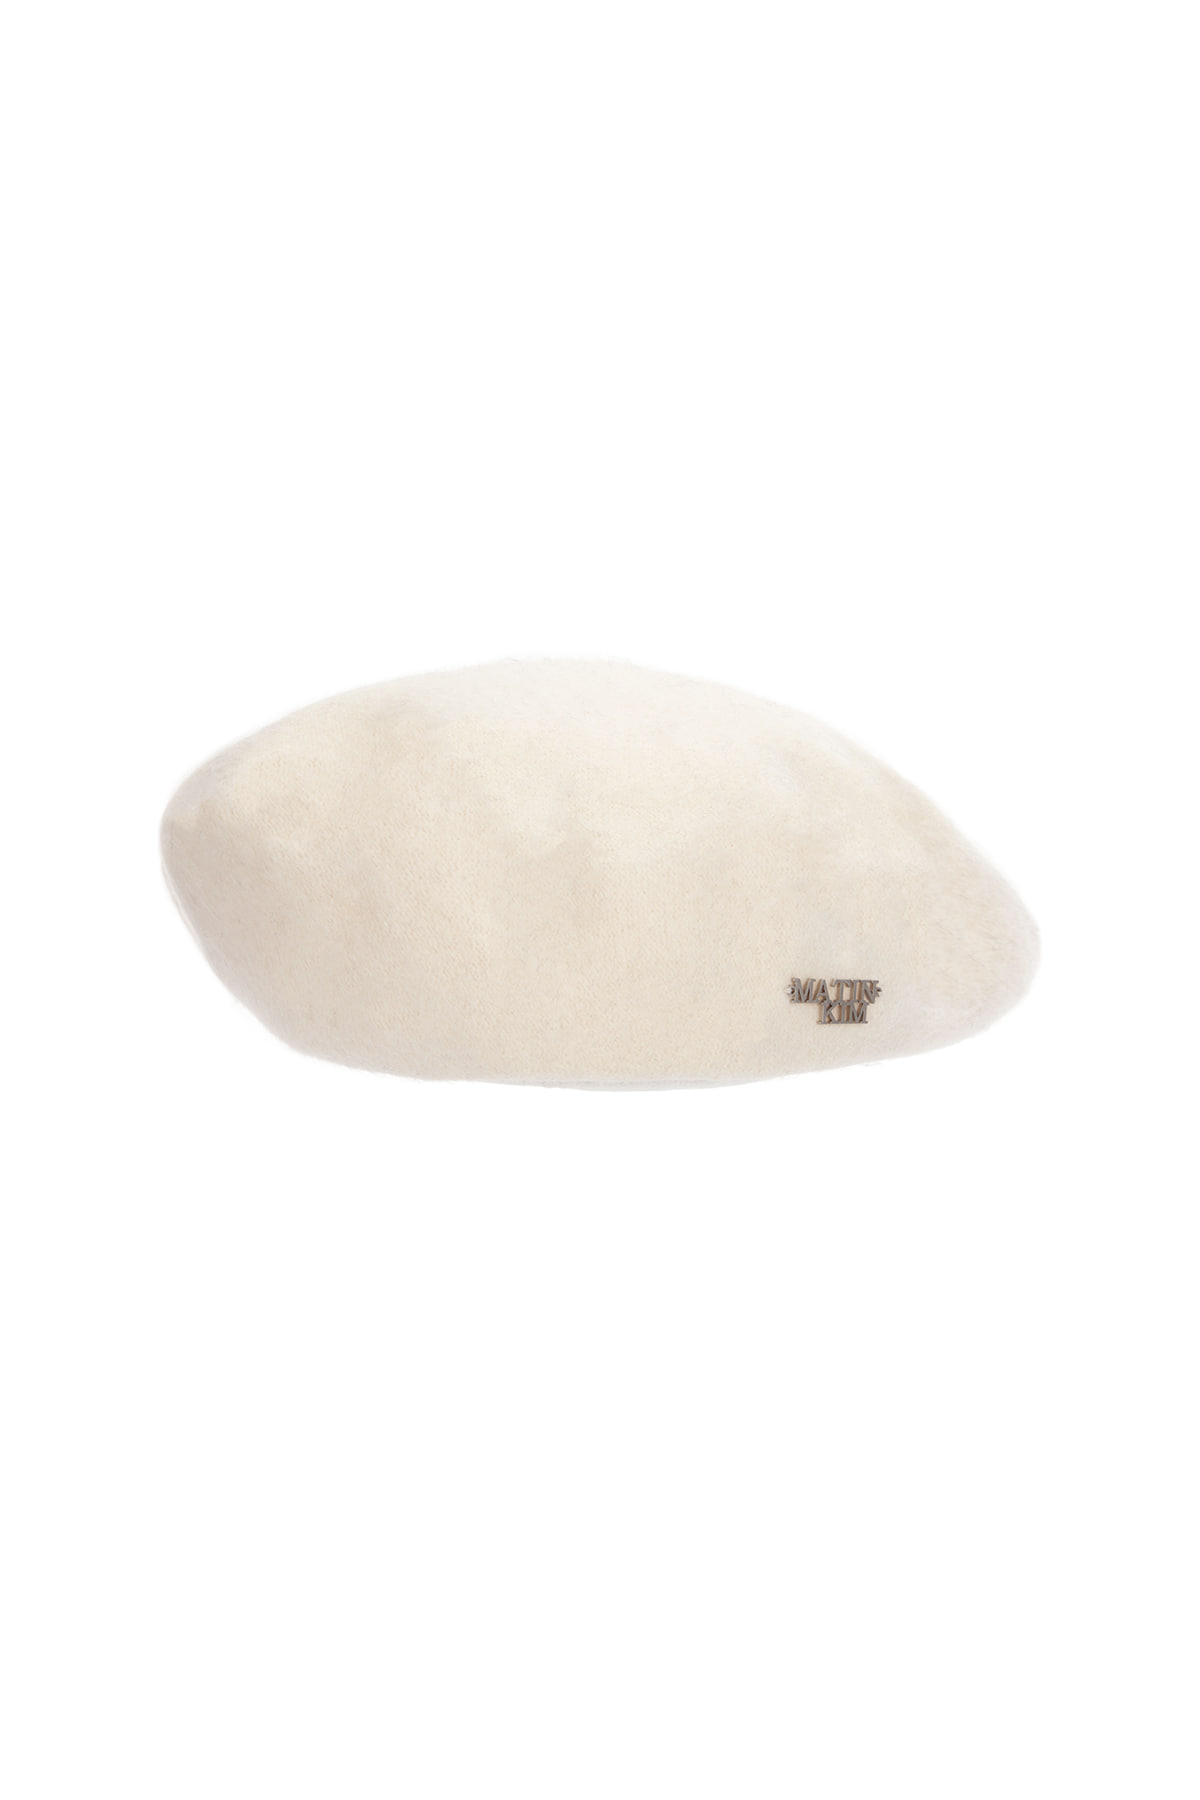 STUD LOGO POINT BERET IN IVORY